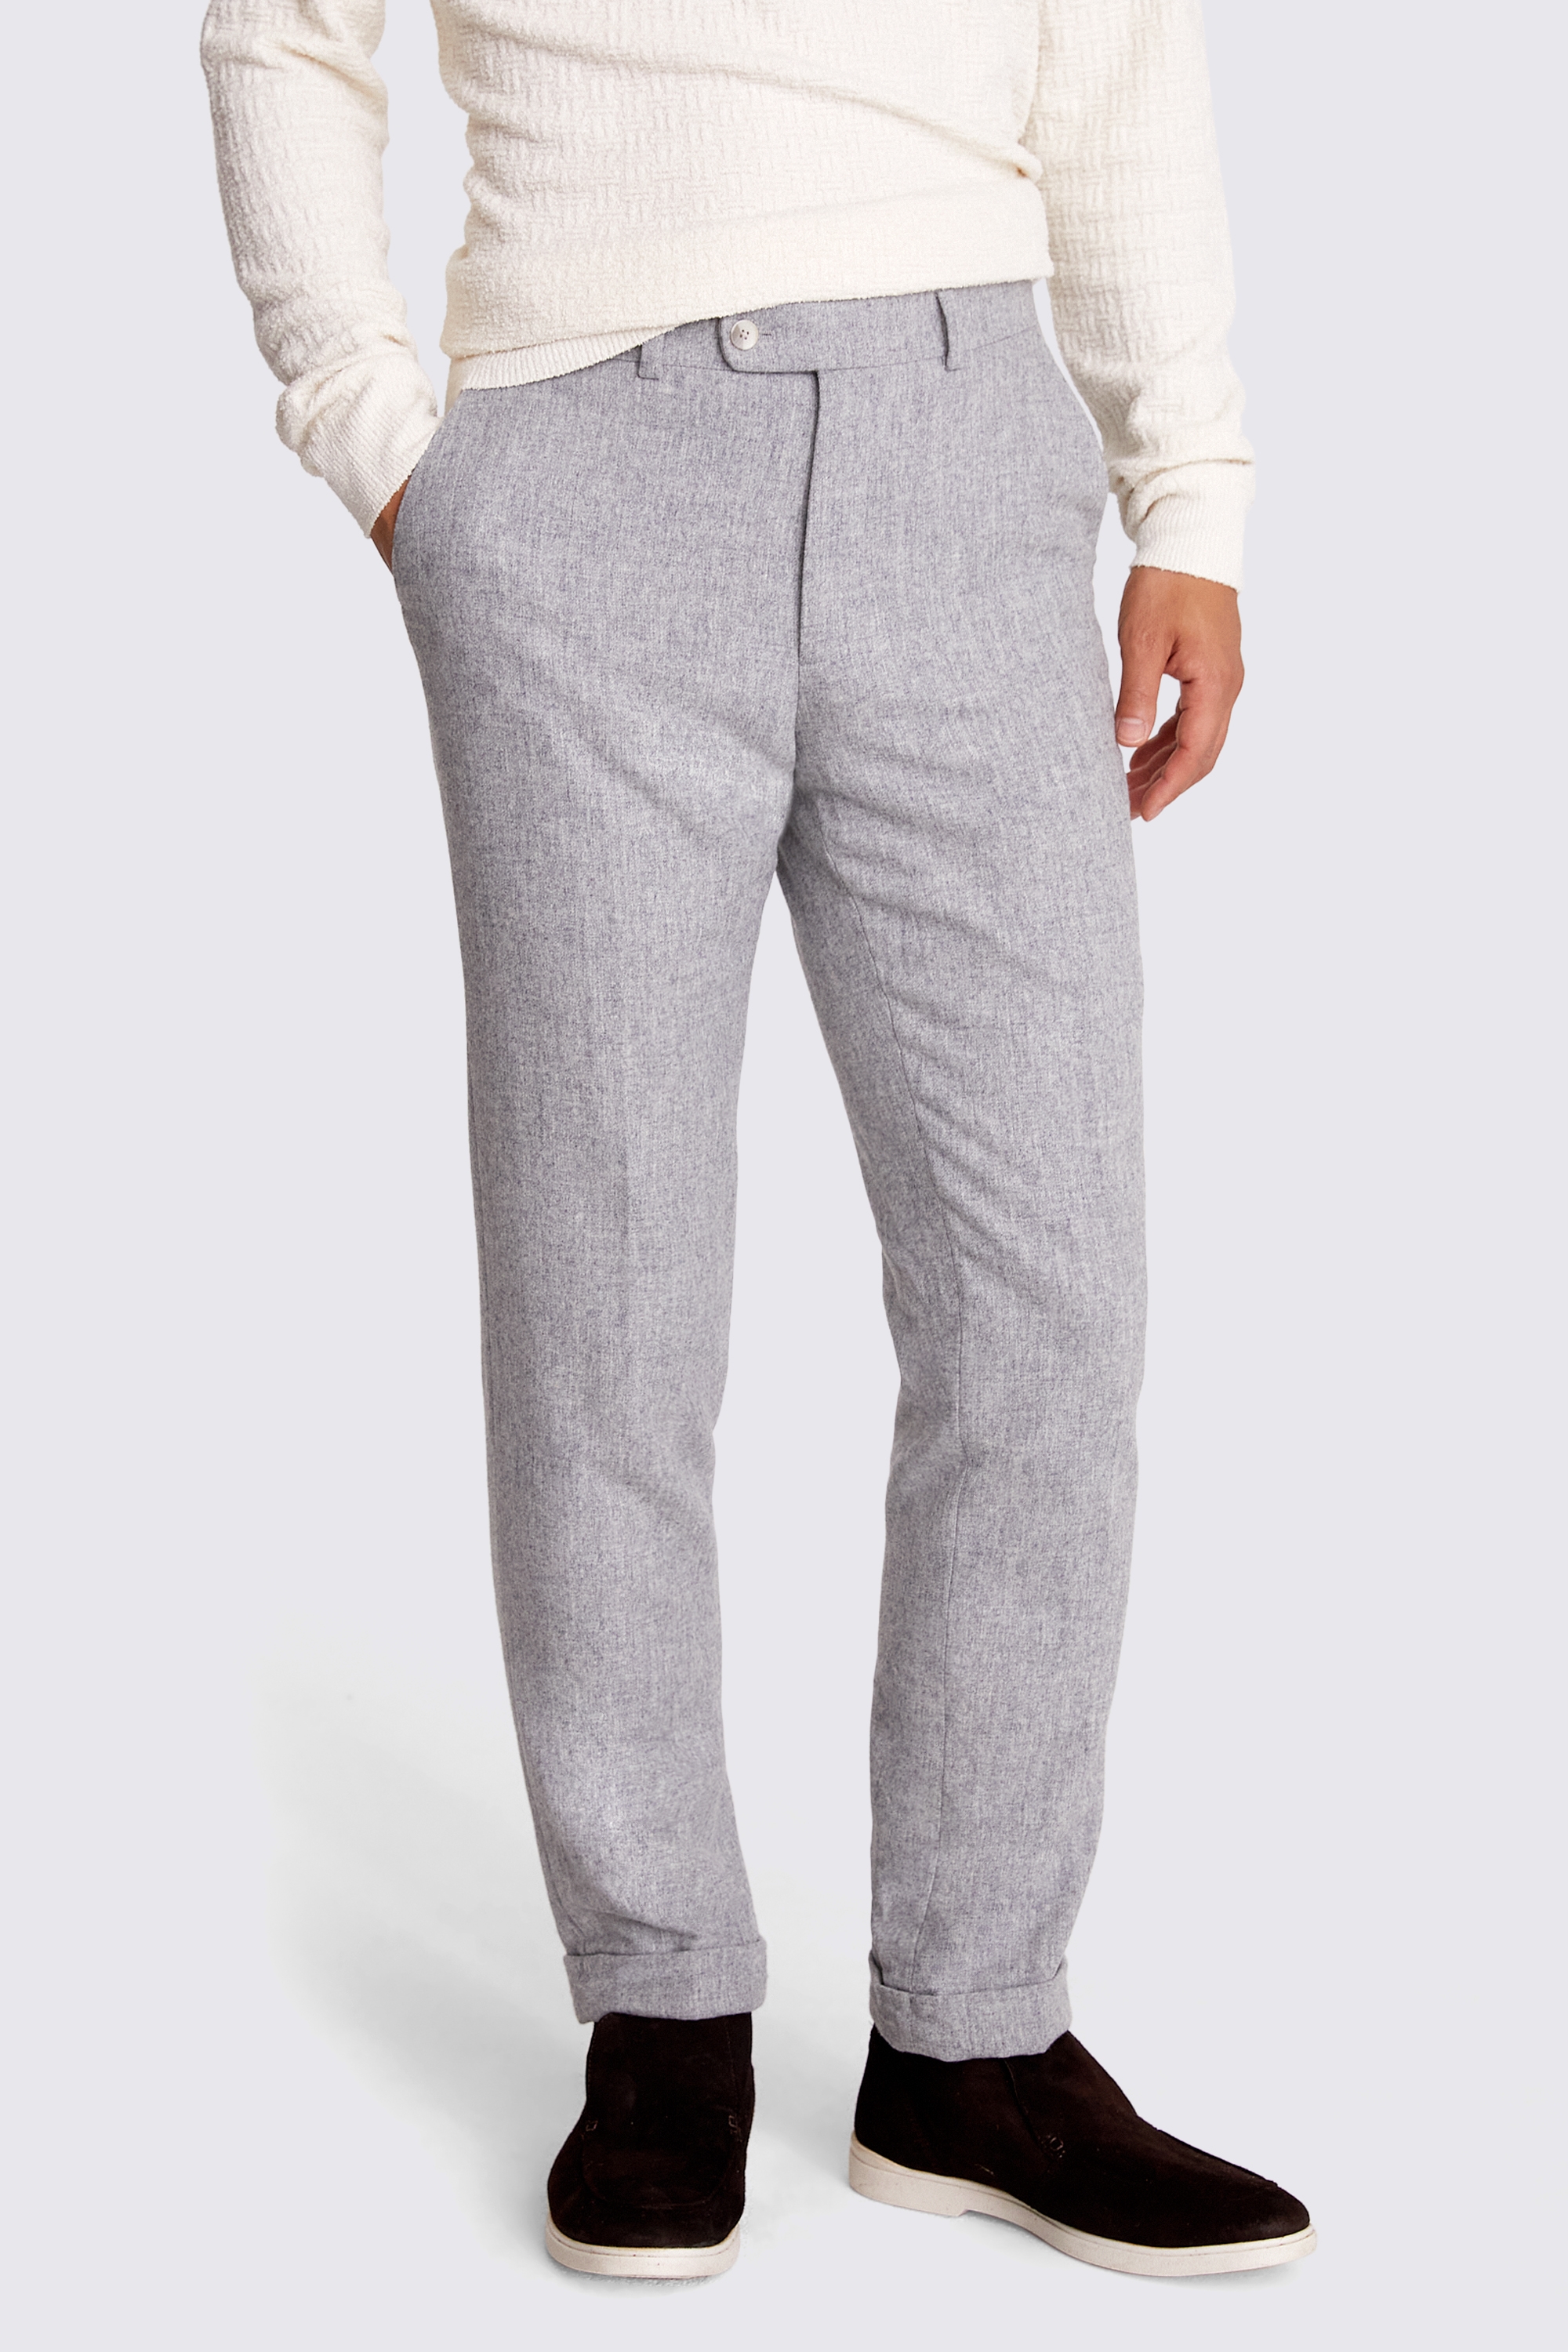 Tailored Fit Light Grey Flannel Trousers | Buy Online at Moss